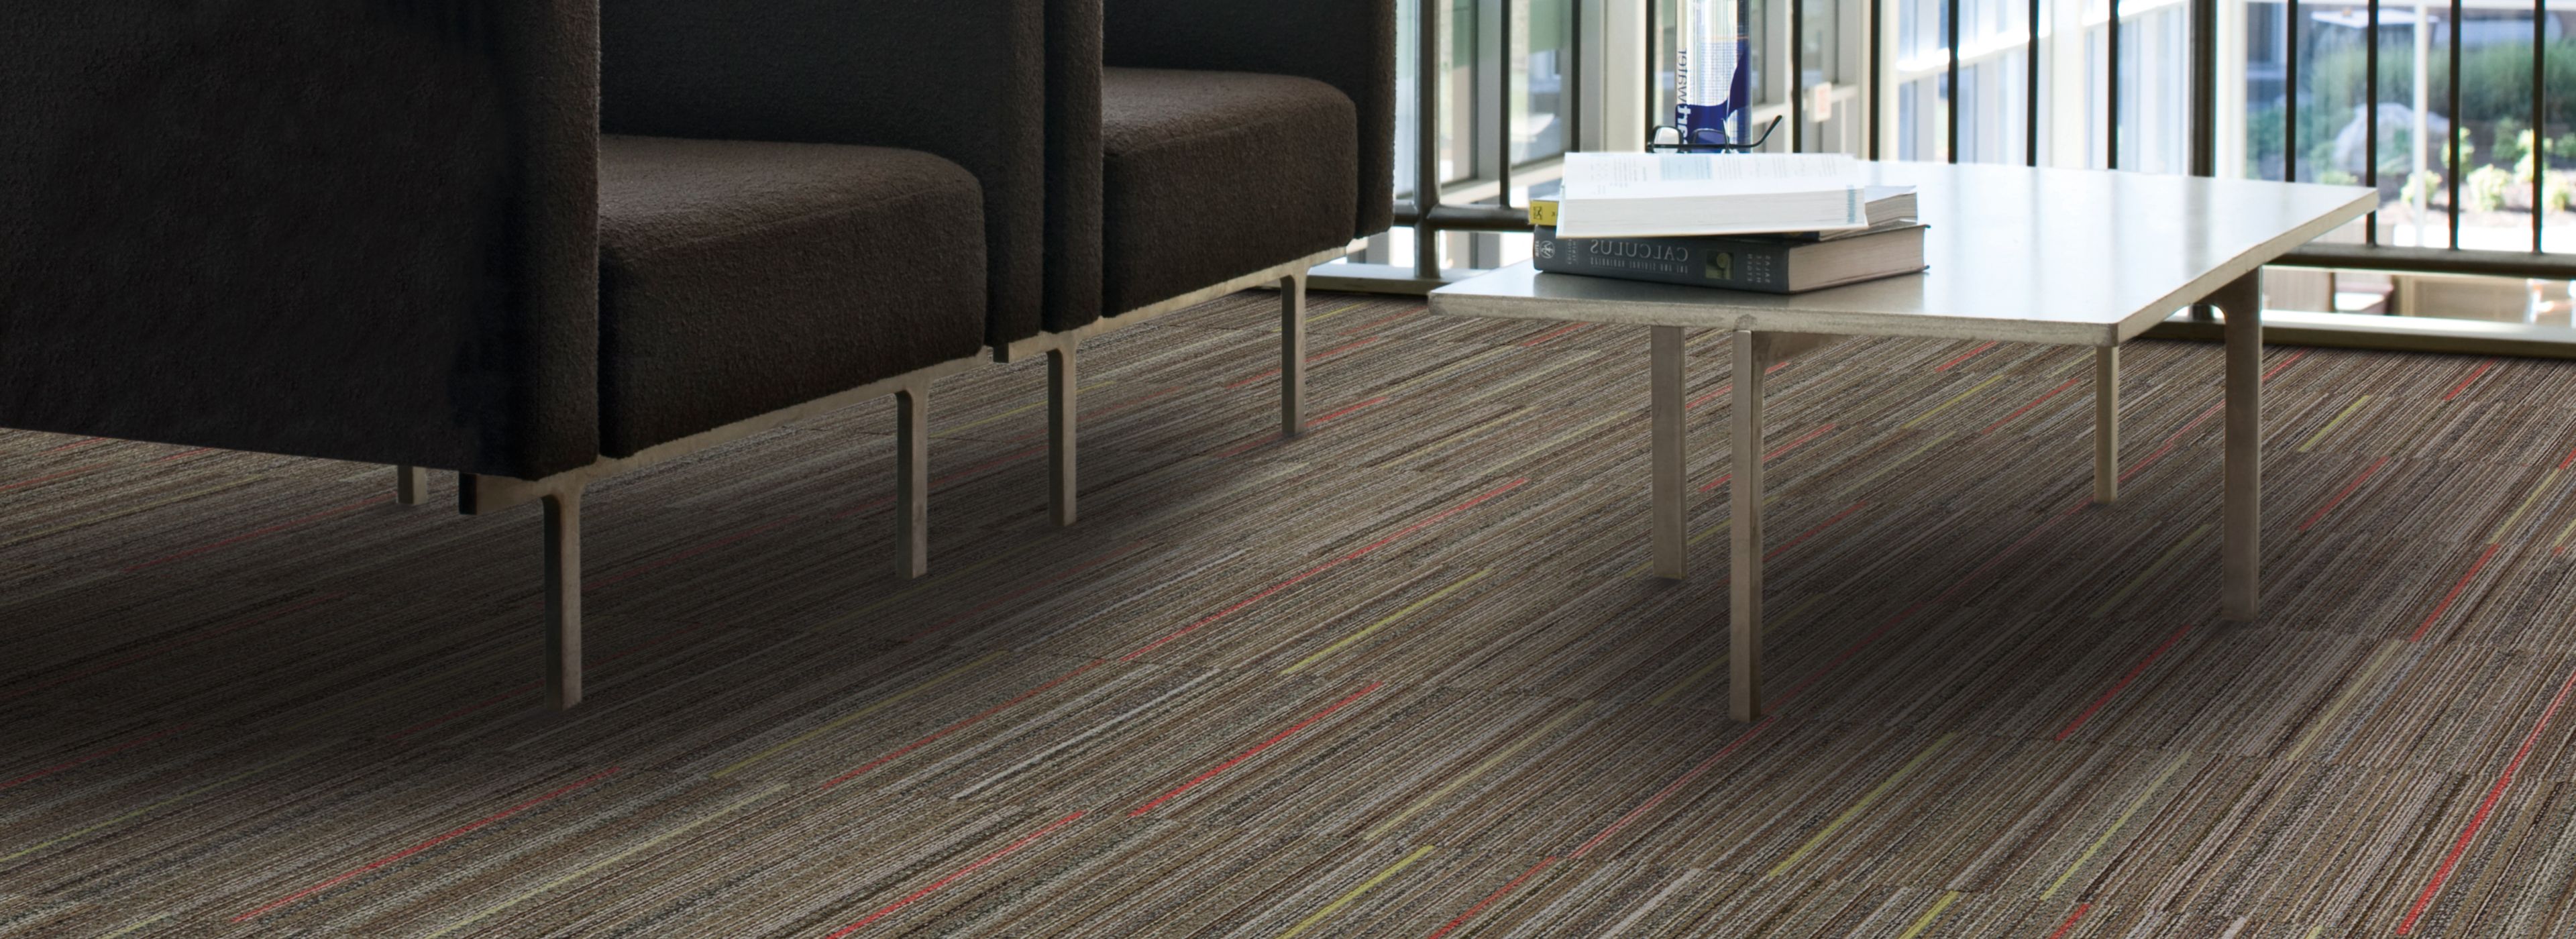 Interface Primary Stitch in seating area with books on table imagen número 1